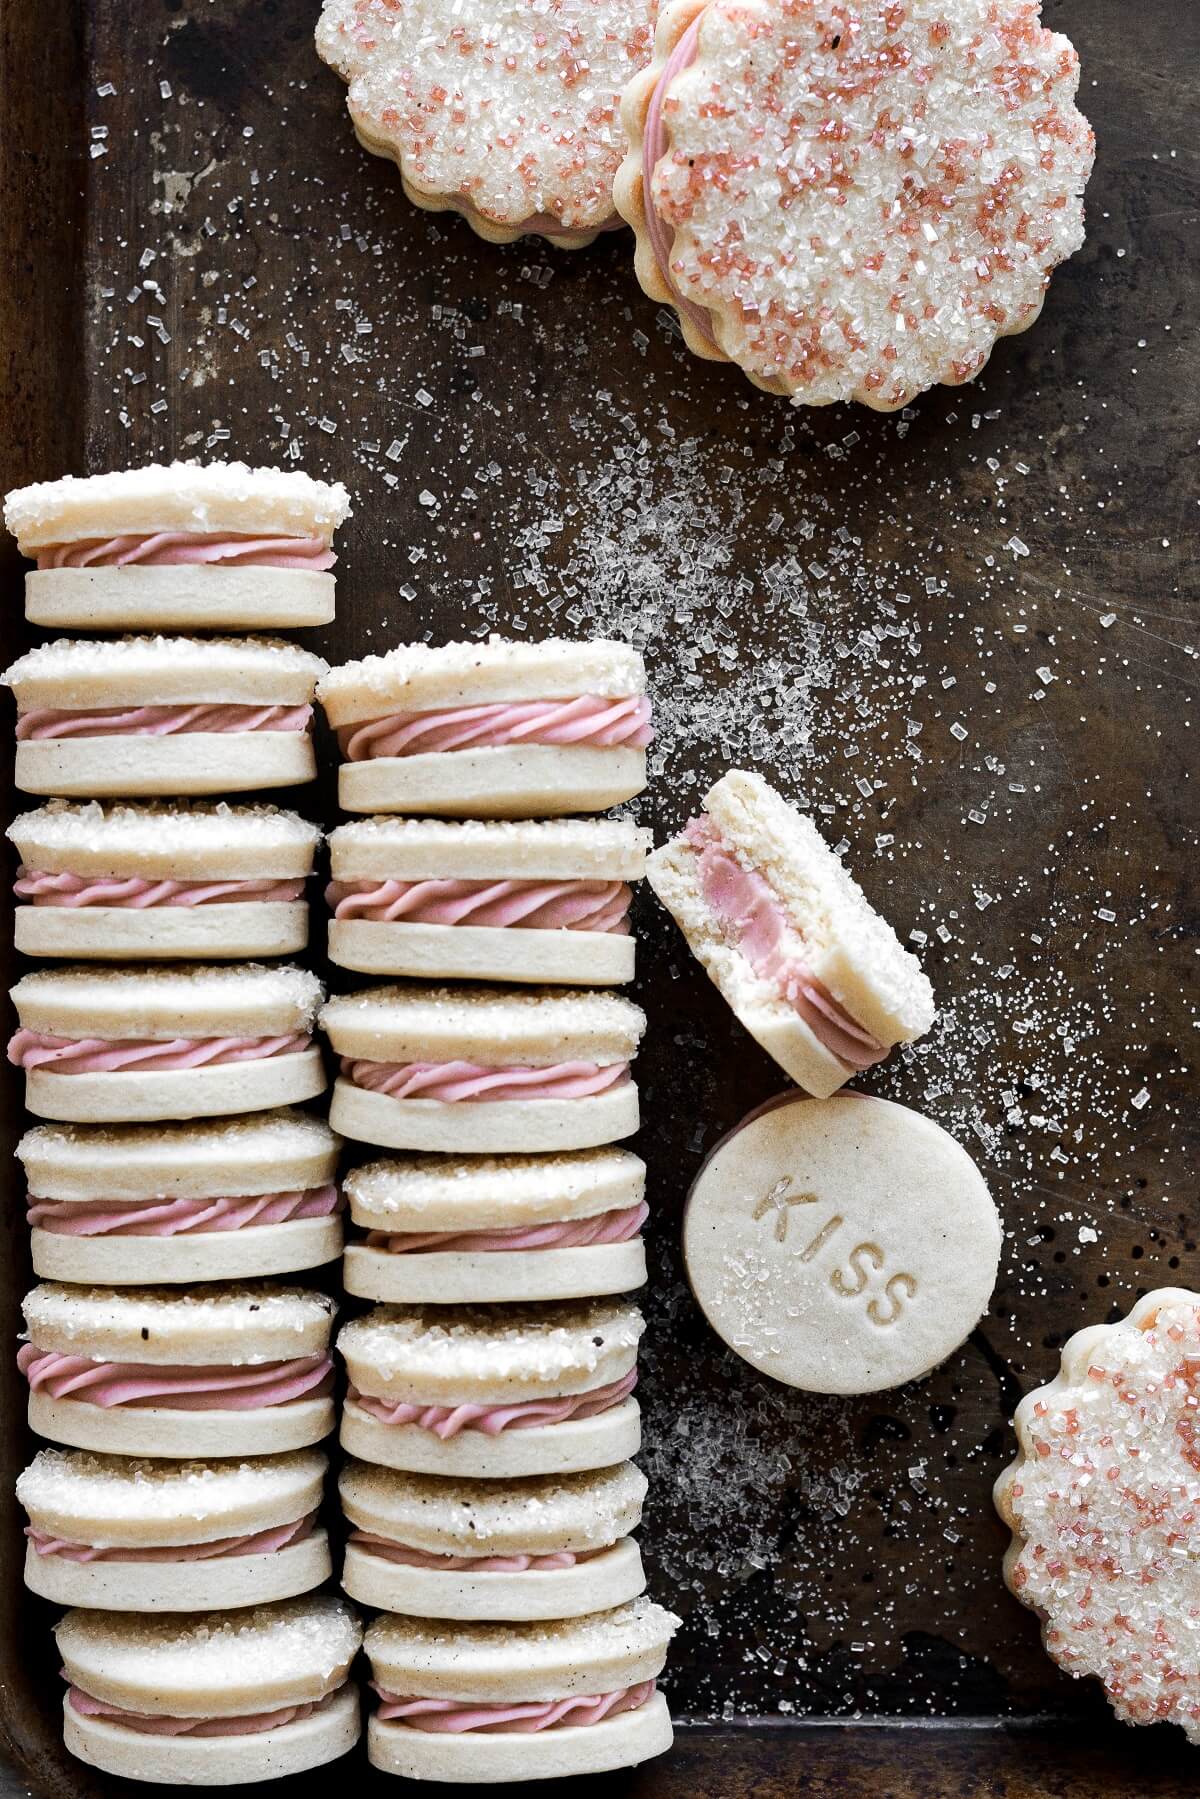 A row of vanilla bean sandwich cookies with pink raspberry frosting, on a baking sheet.